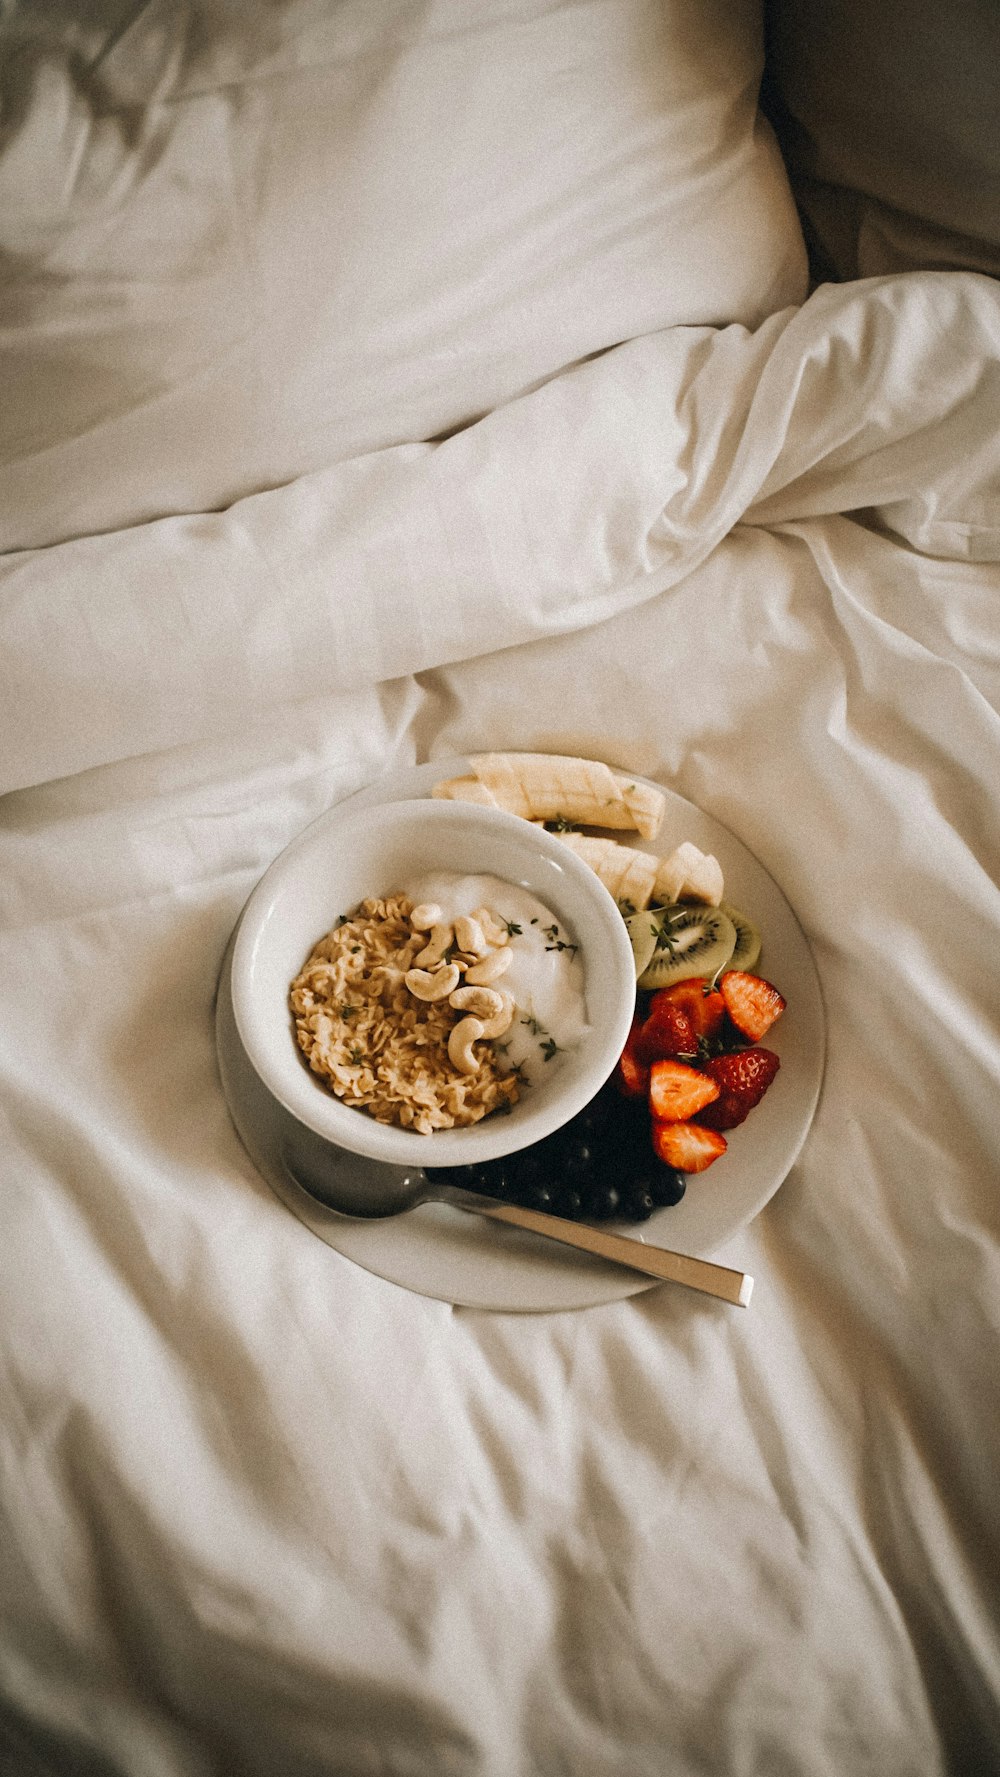 a bowl of oatmeal and a plate of fruit on a bed